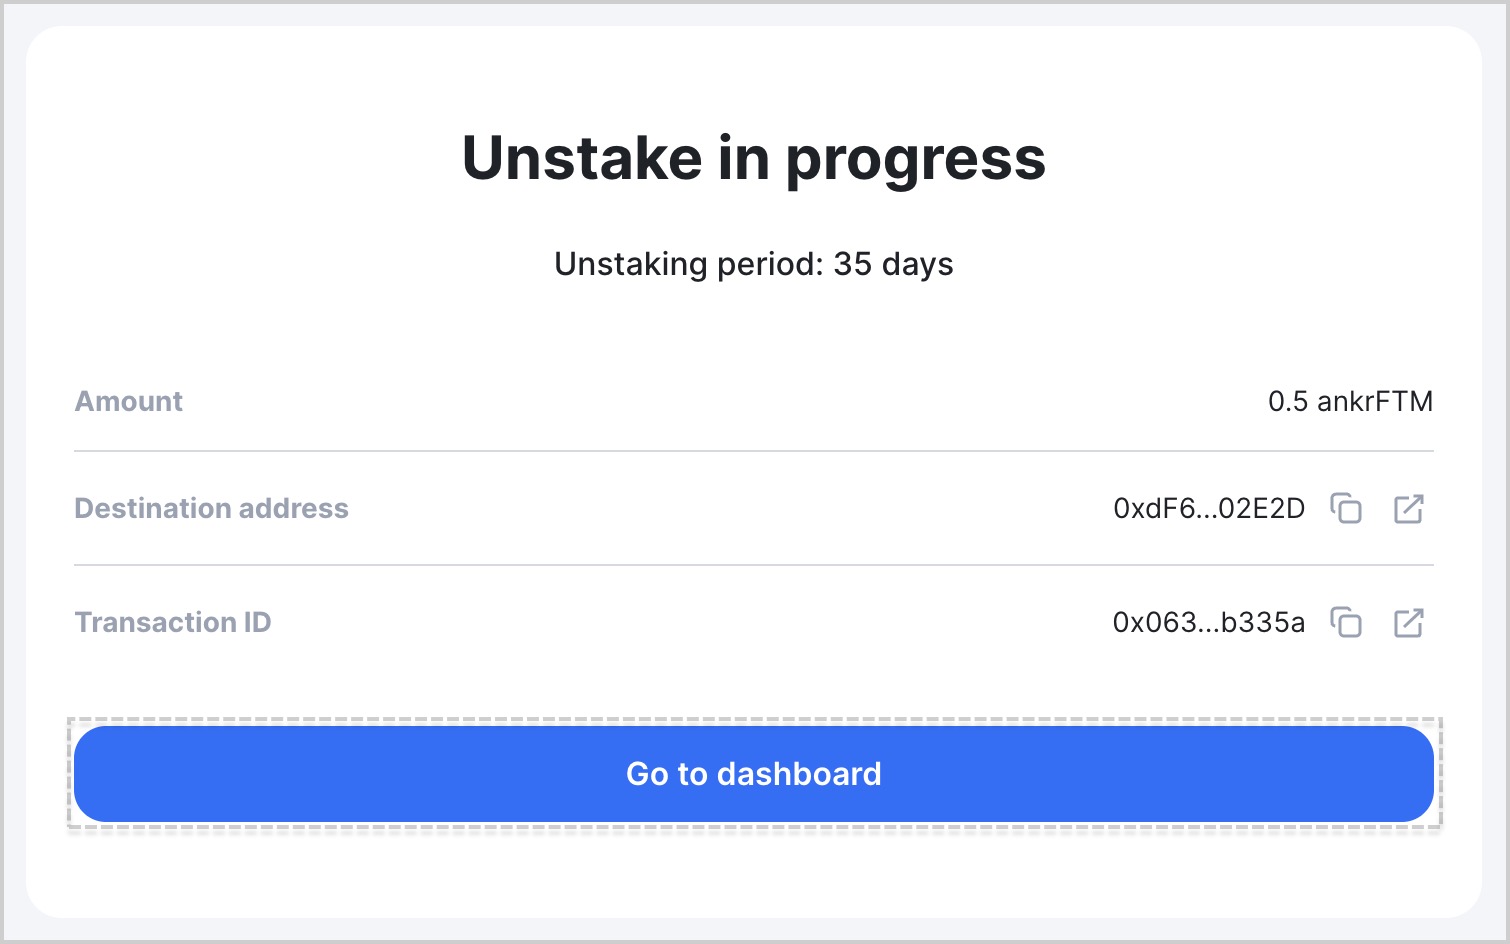 Click Go to dashboard